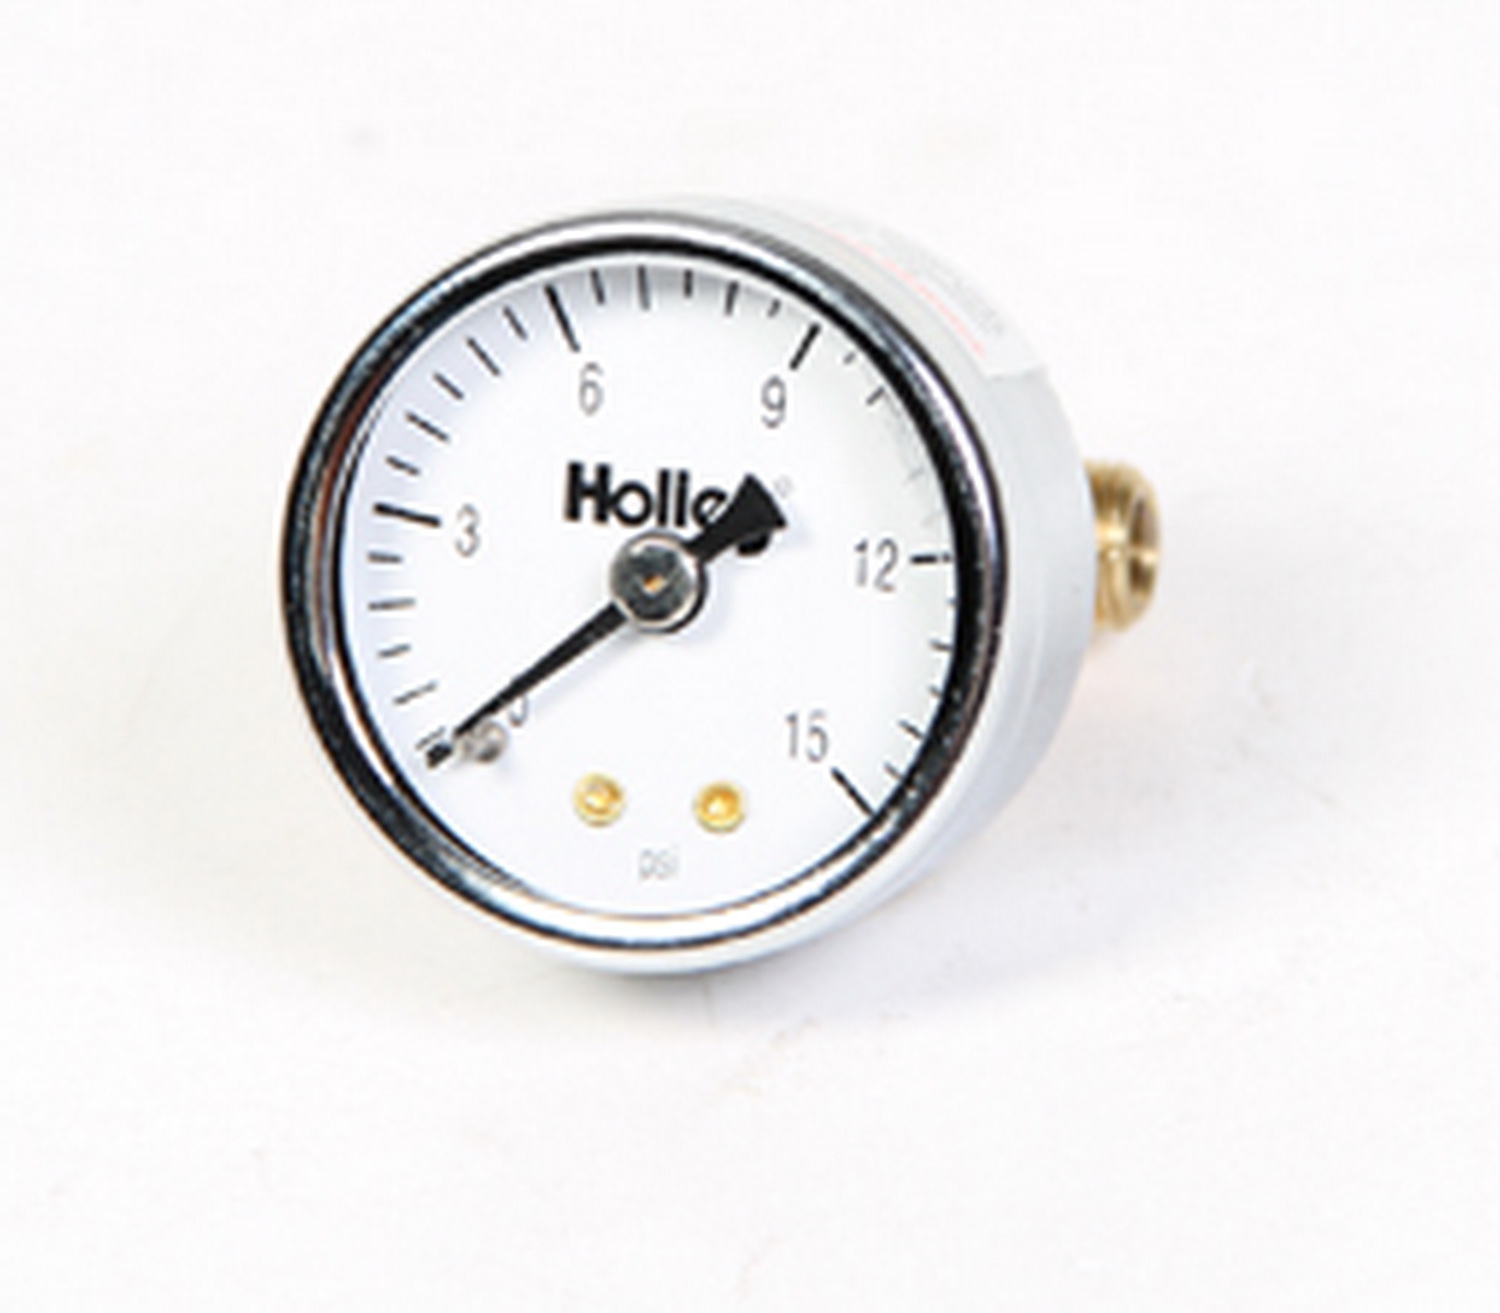 Holley Performance Holley Performance 26-500 Mechanical Fuel Pressure Gauge